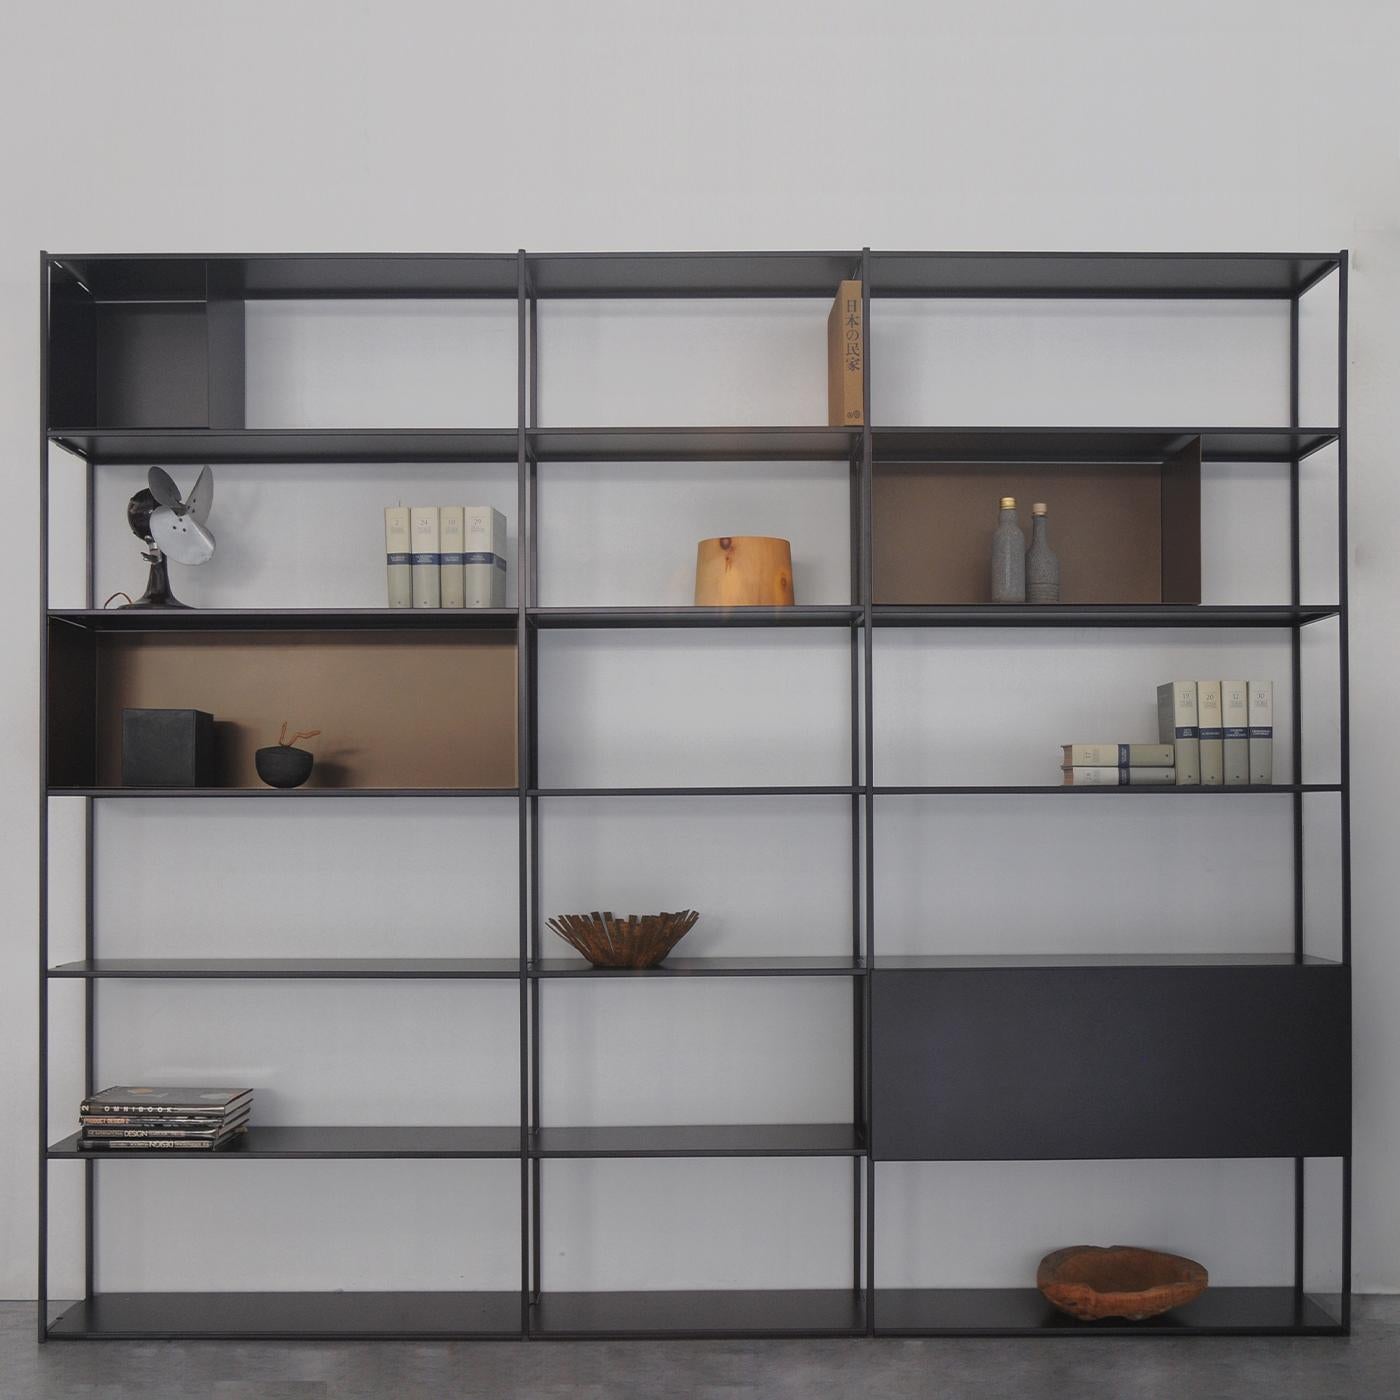 A clever solution to furnish a wide, bare wall in residential and professional contexts alike, this shelving unit is the perfect synthesis of sleekness and functionality. The three open boxes (cm 35 x 31 x H 36; 70 x 31 x H 36; 100 x 31 x H 36) and